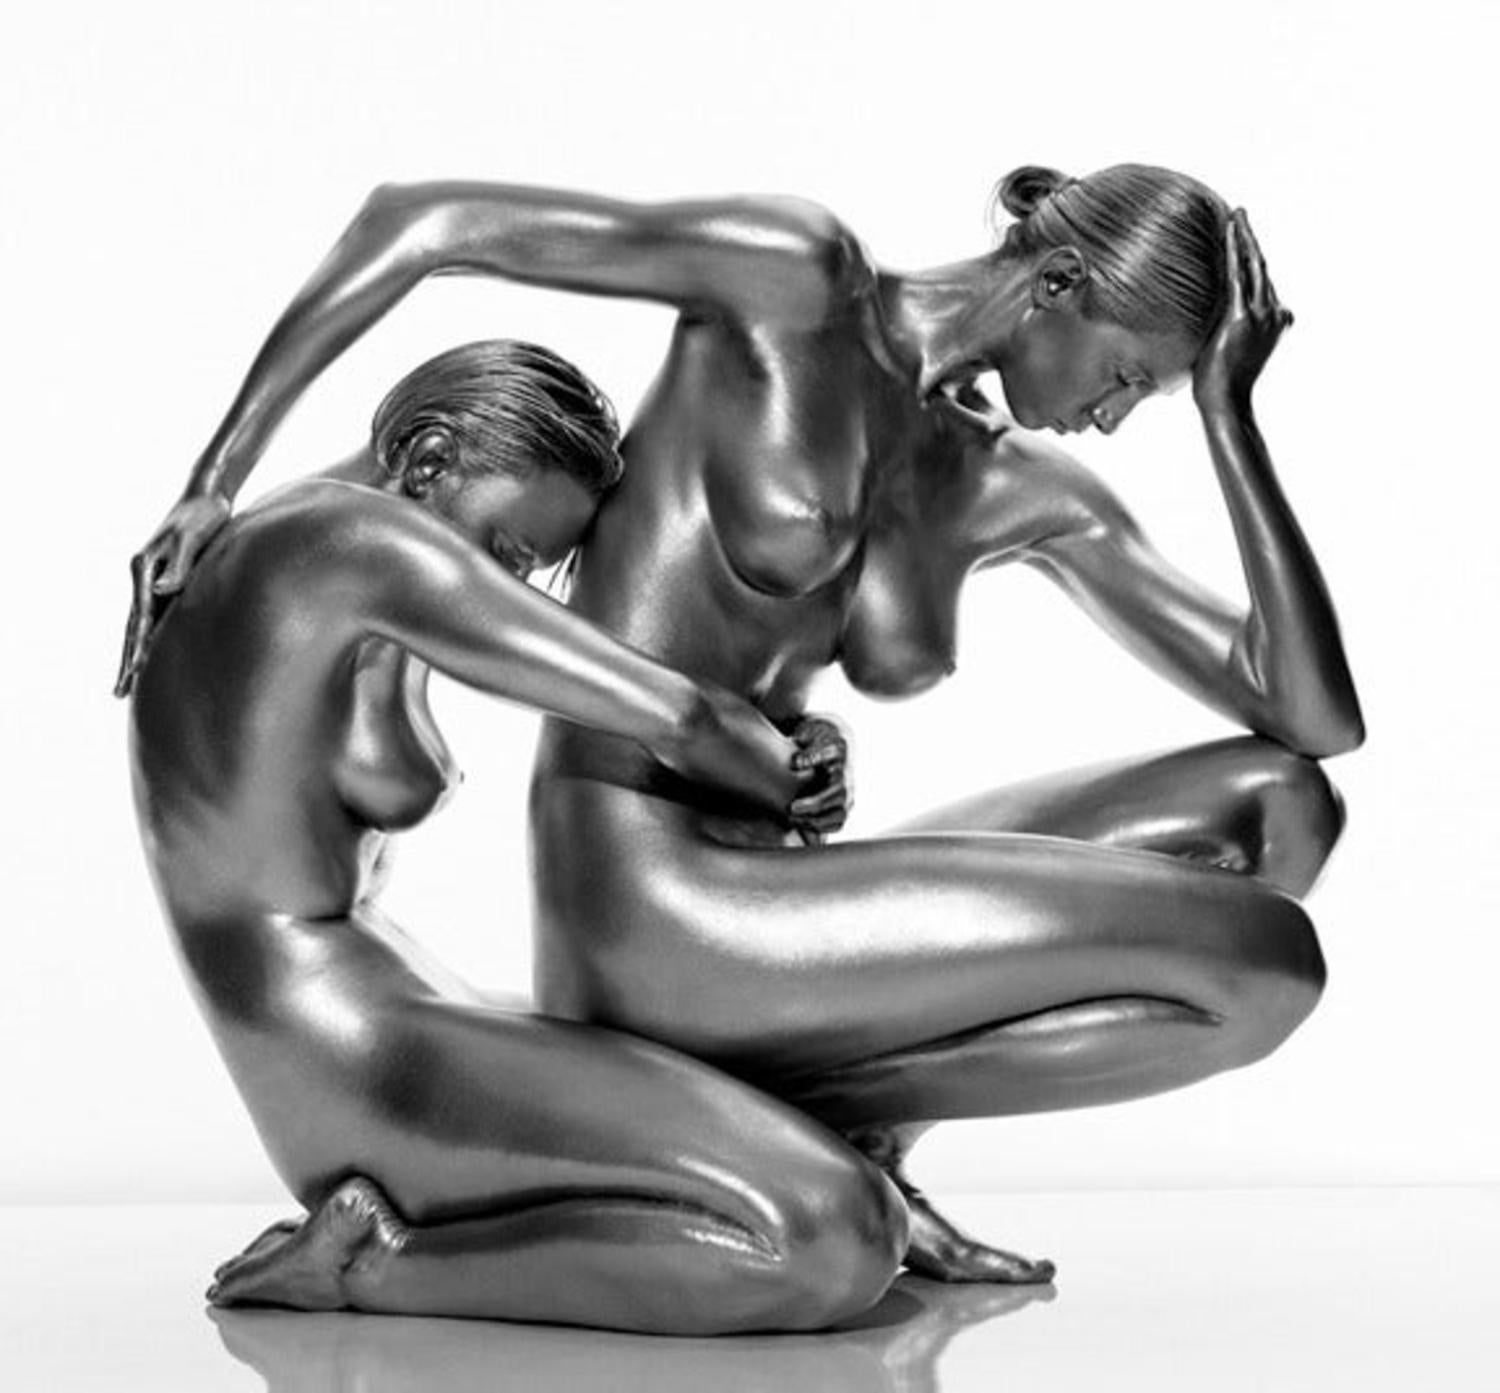 Demeter and Persephone: 2 women embracing each other, naked, silver skin overall - Photograph by Guido Argentini